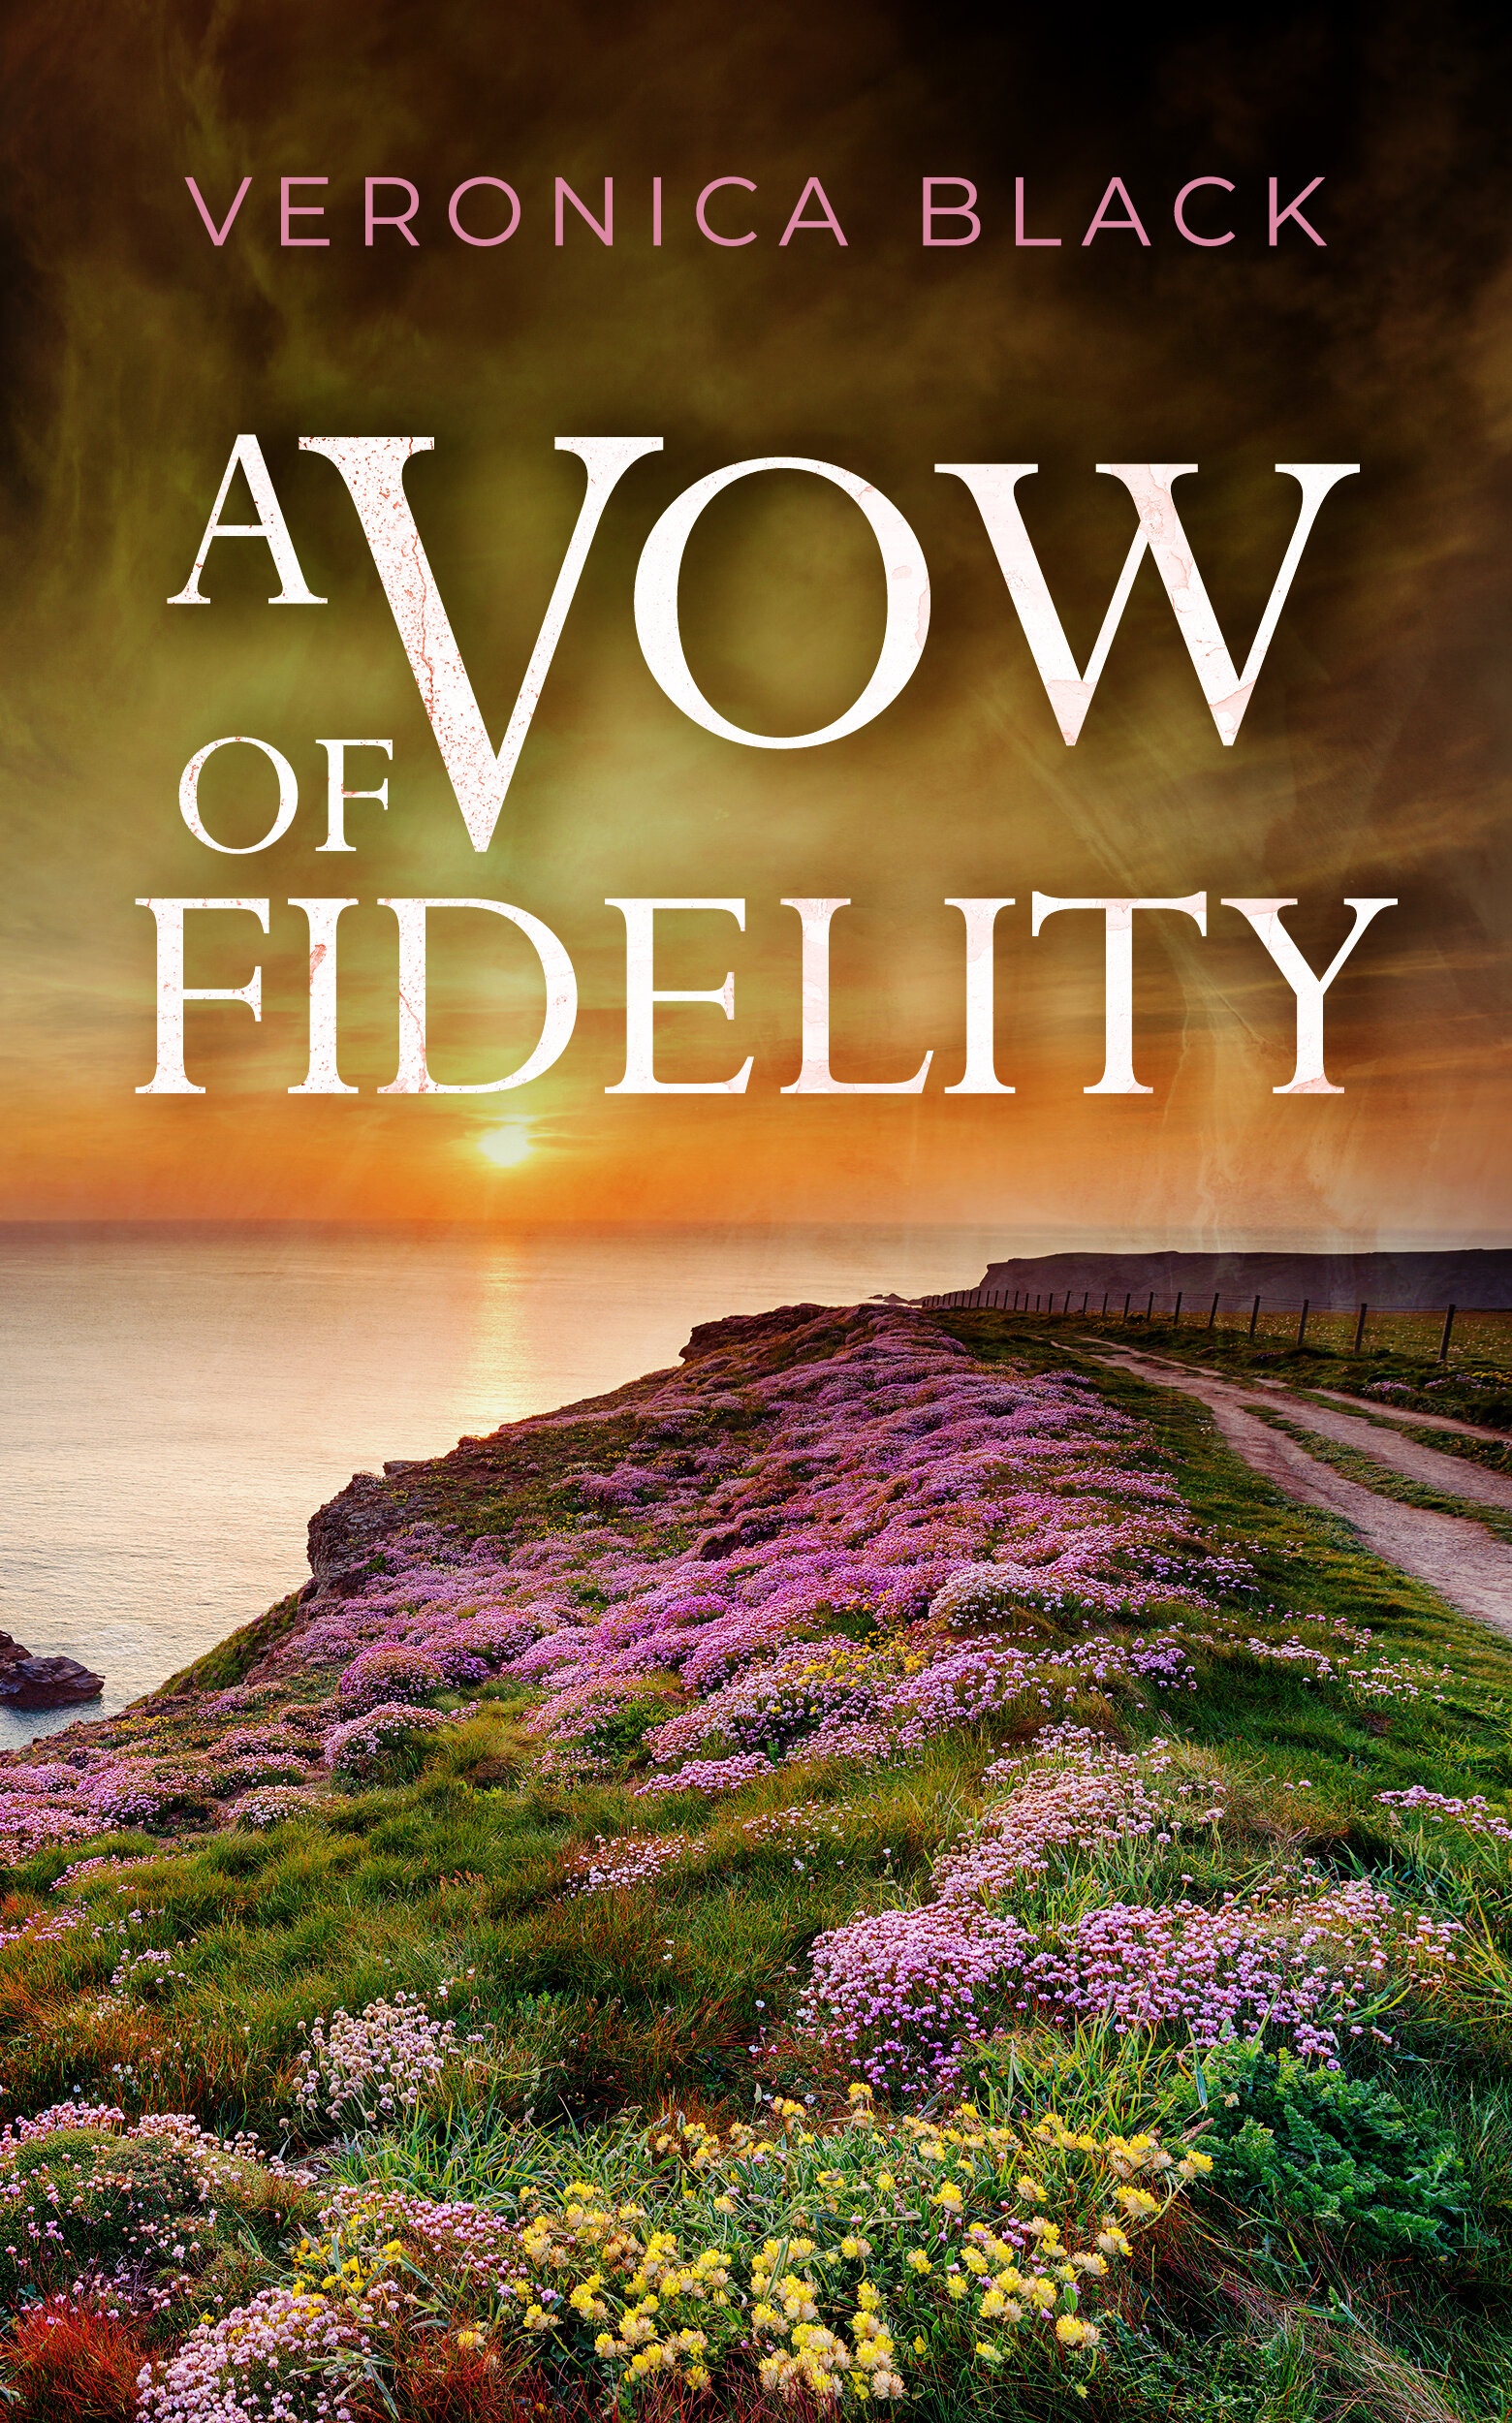 A VOW OF FIDELITY publish cover.jpg